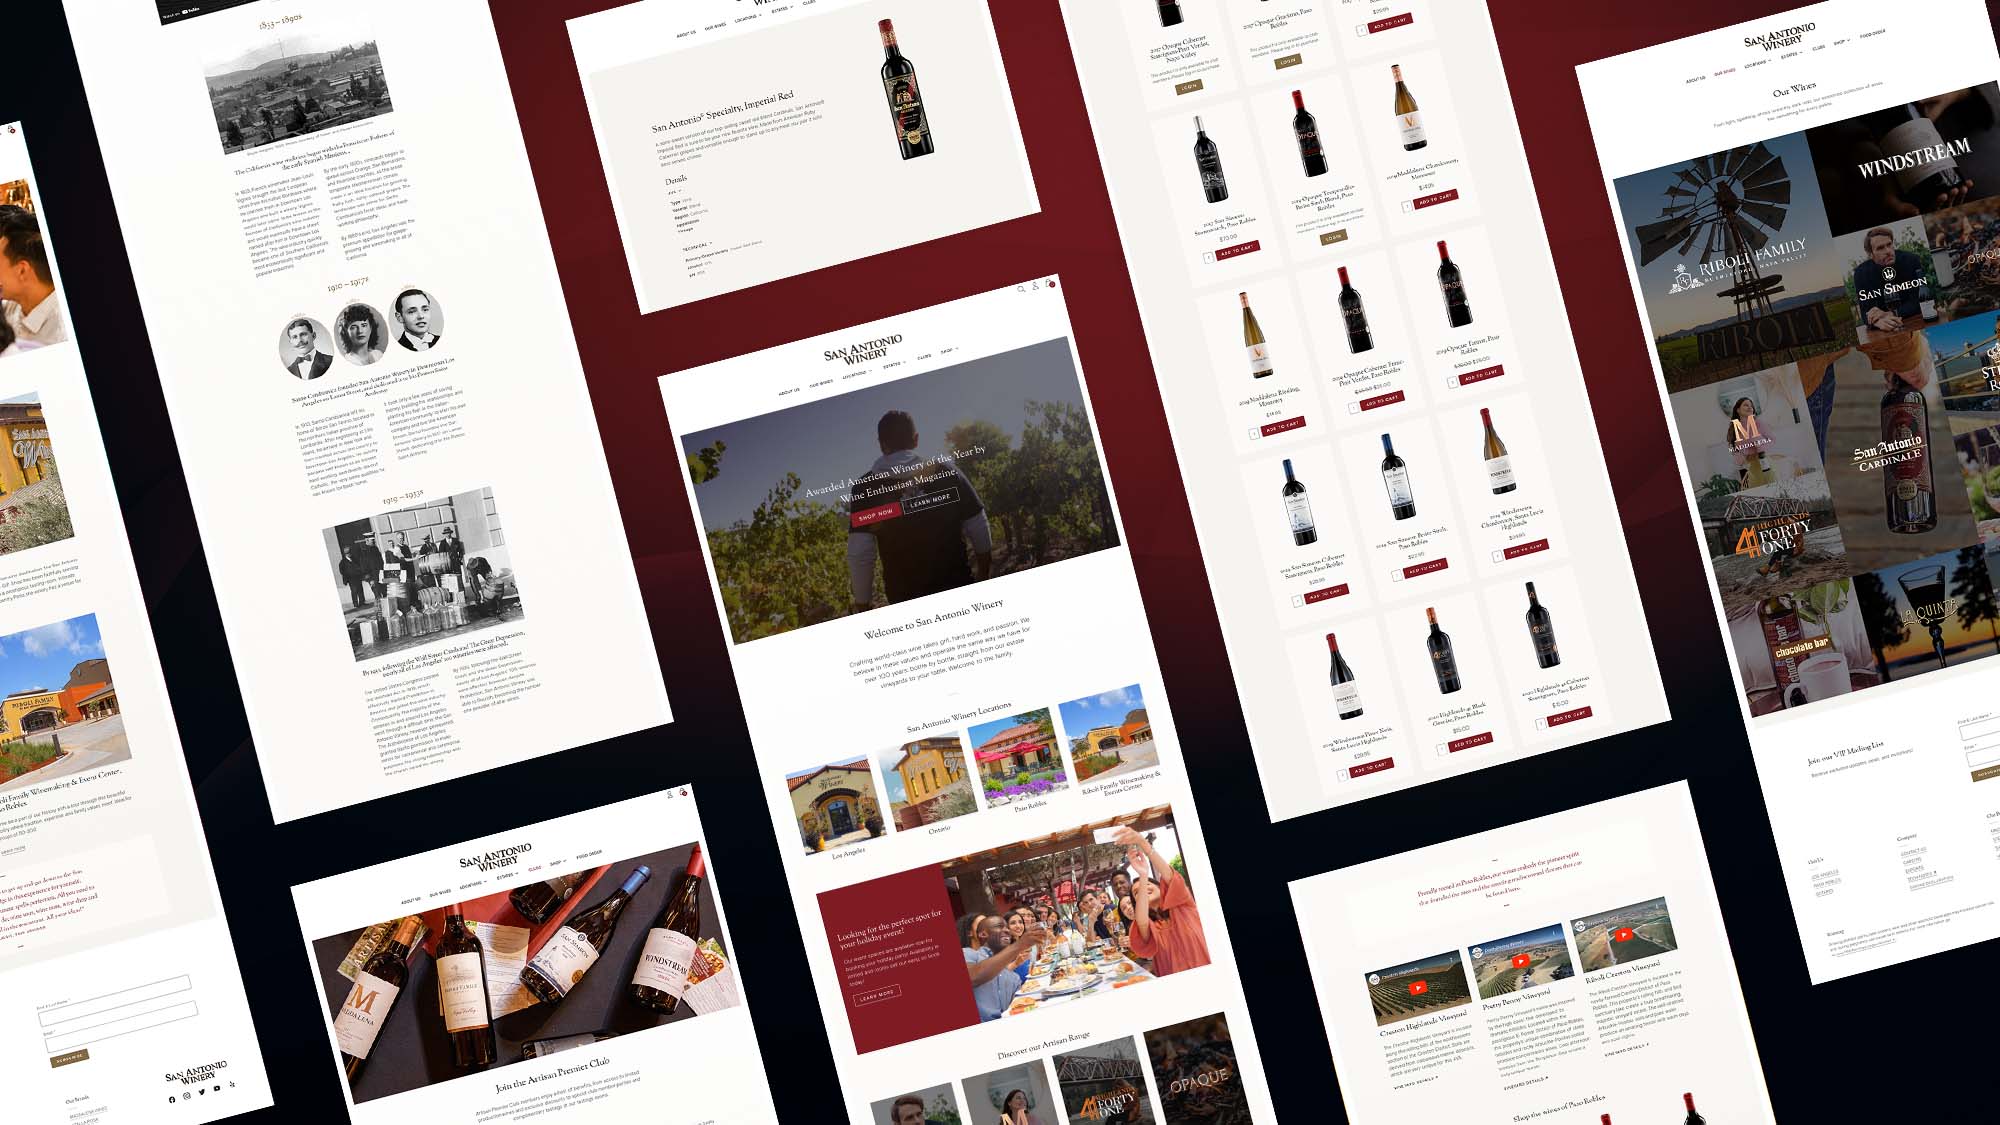 Styled mockup showing various pages on the San Antonio Winery website as designed and built by 5forests